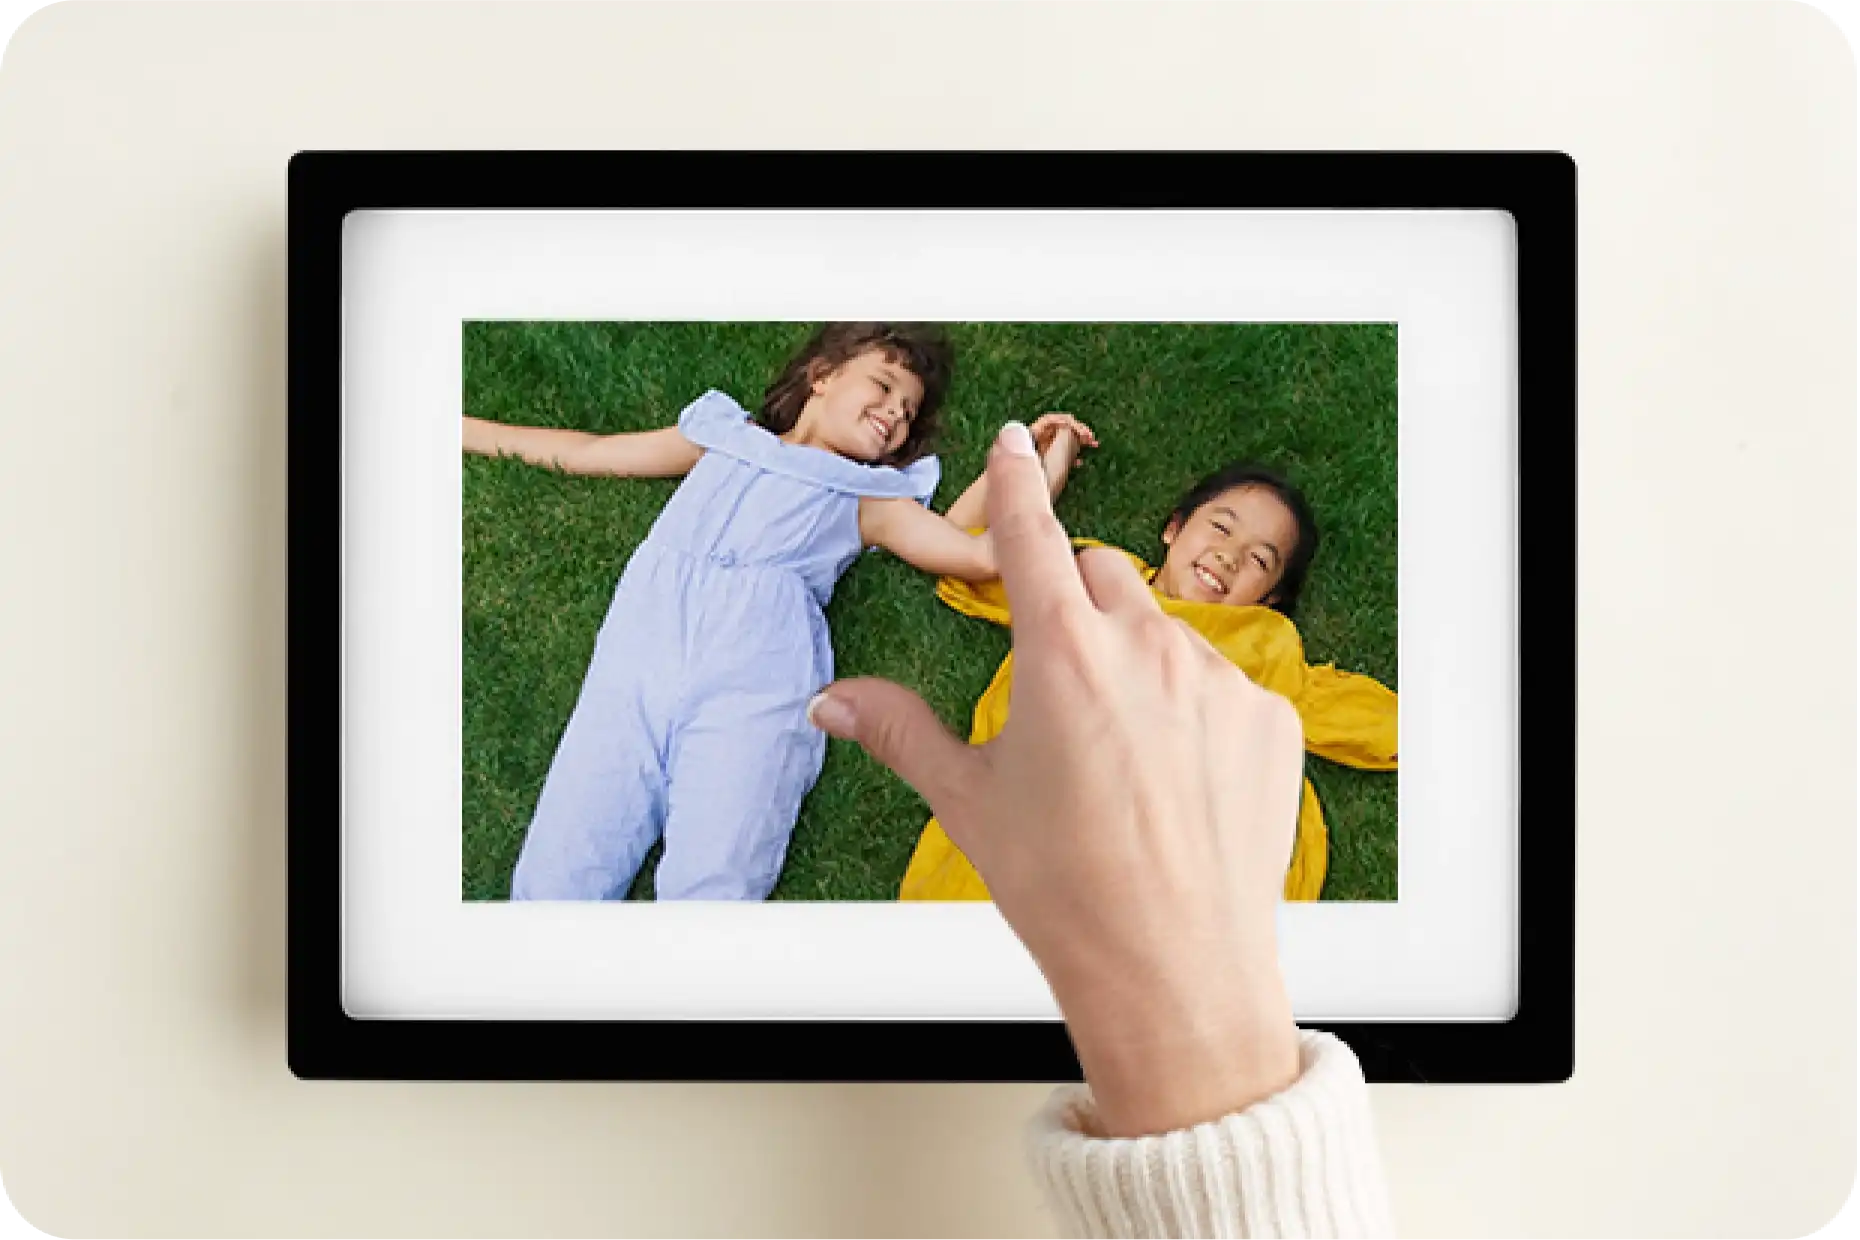 A customer touching the skylight frame which displays two children playing on grass